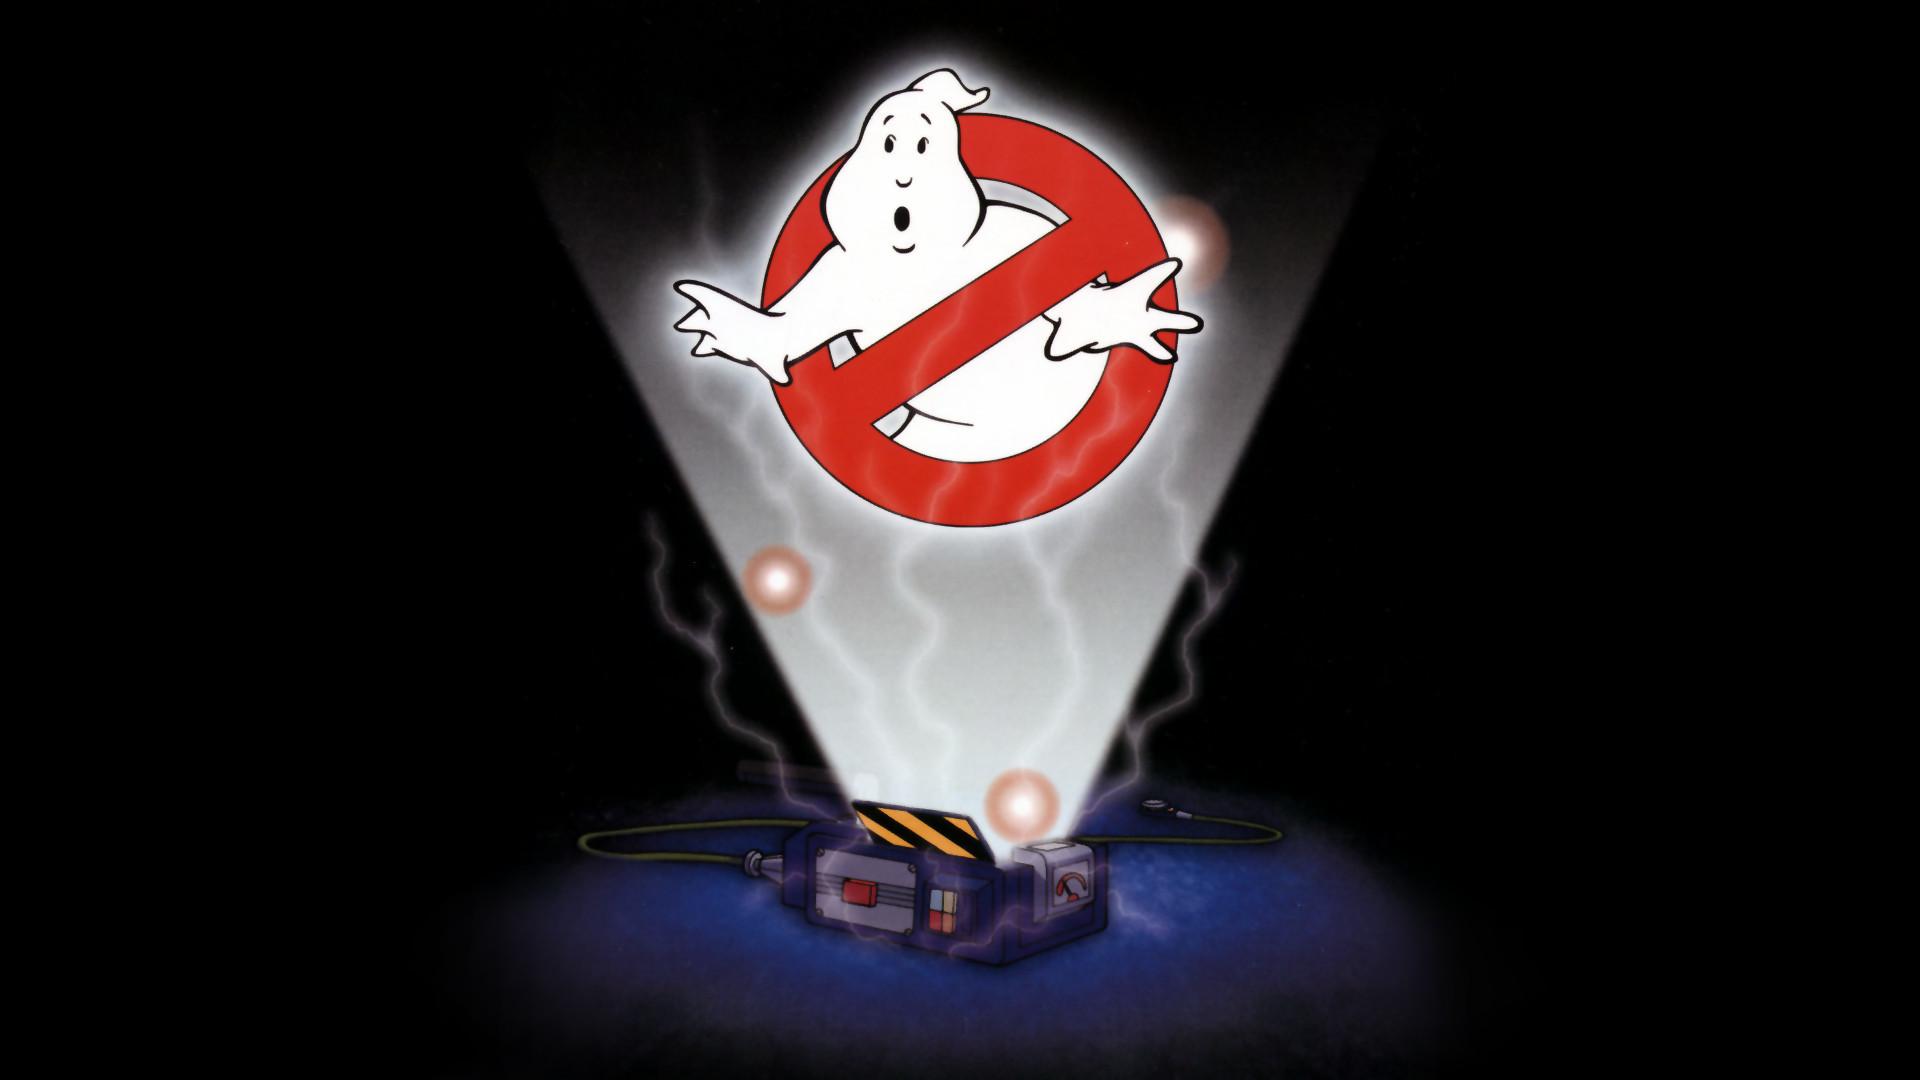 ghostbusters 3